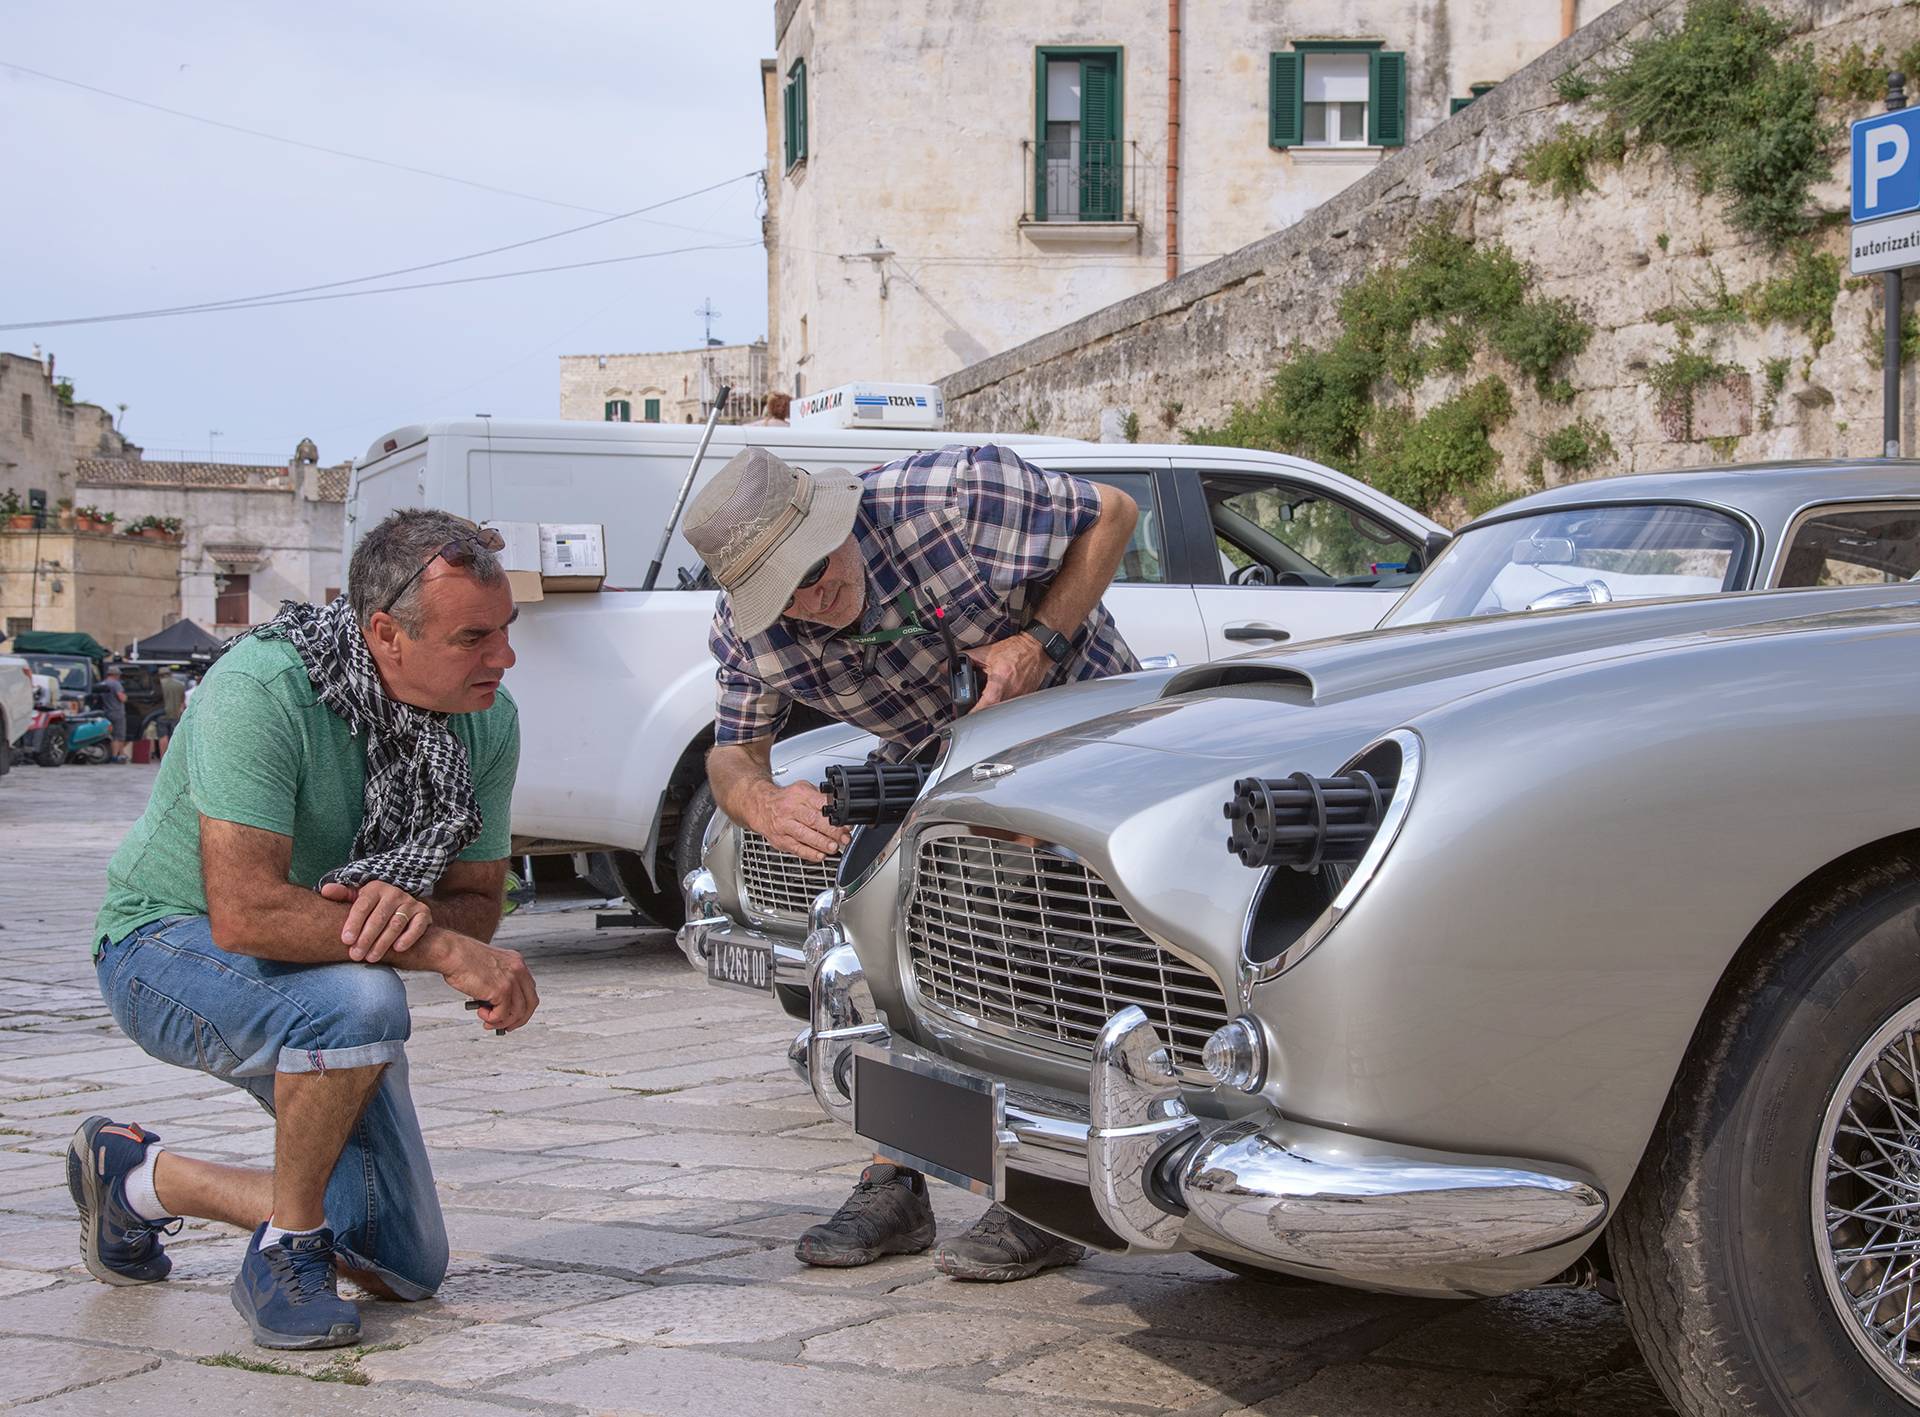 Under The Bonnet Of The DB5 In Matera